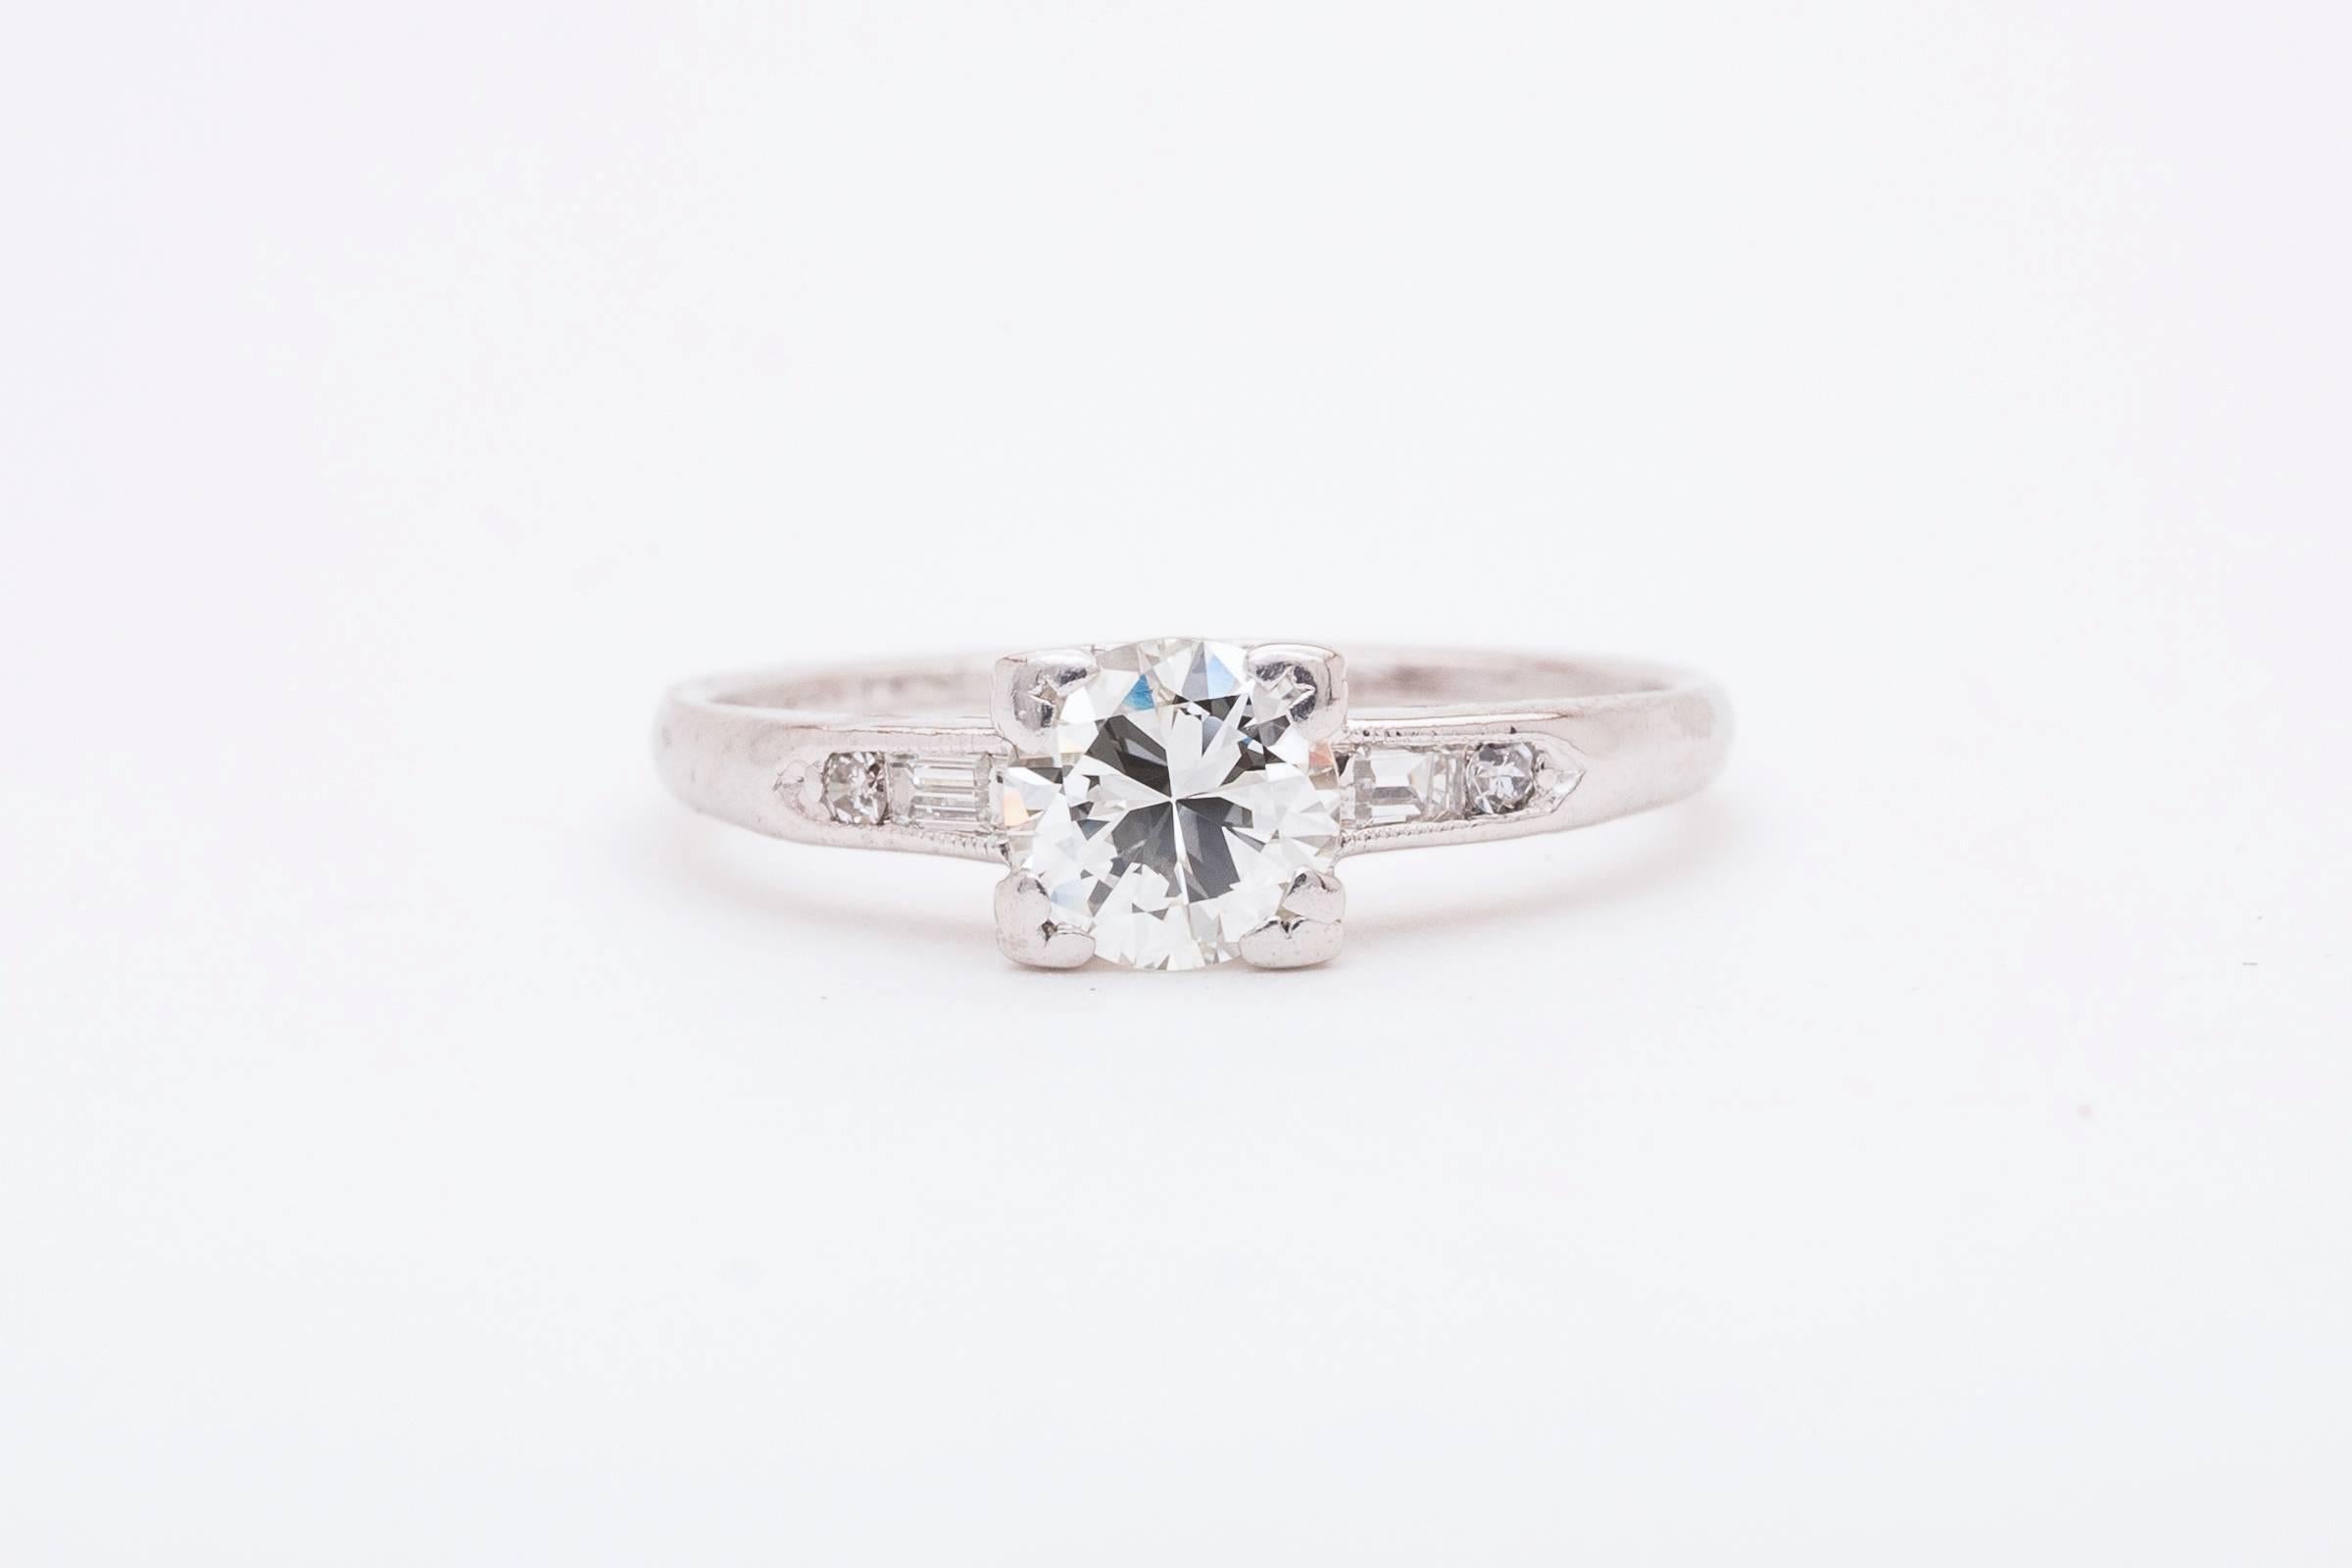 Beacon Hill Jewelers Presents:

A classic original art deco period diamond engagement ring in platinum. Centered by a sparkling old European cut diamond this ring features a pair of baguette and round accenting diamonds in a classic art deco